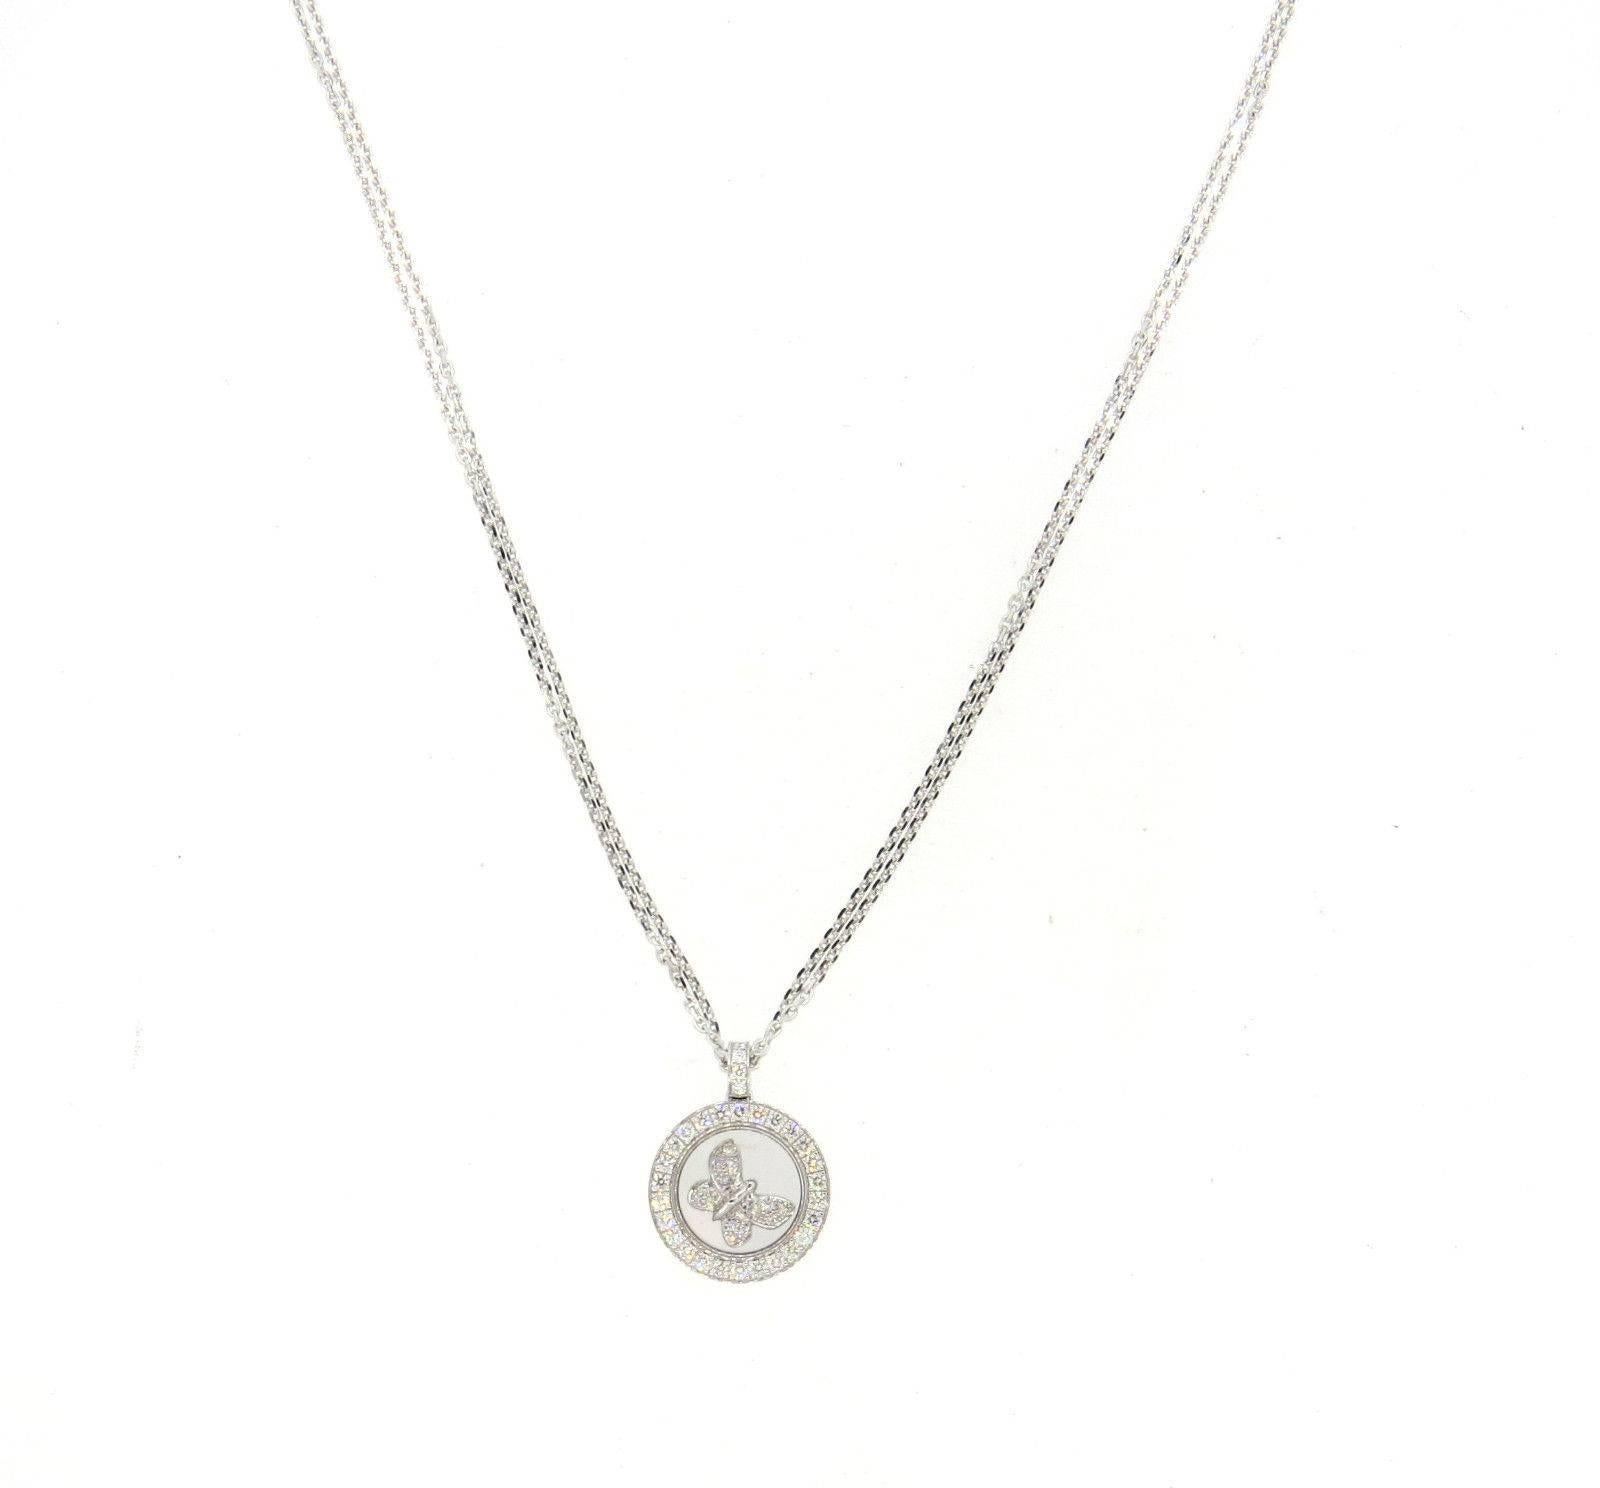 An 18k white gold pendant necklace set with 0.63ctw of F/VVS diamonds.  Crafted by Chopard, the necklace chain is 16 3/4